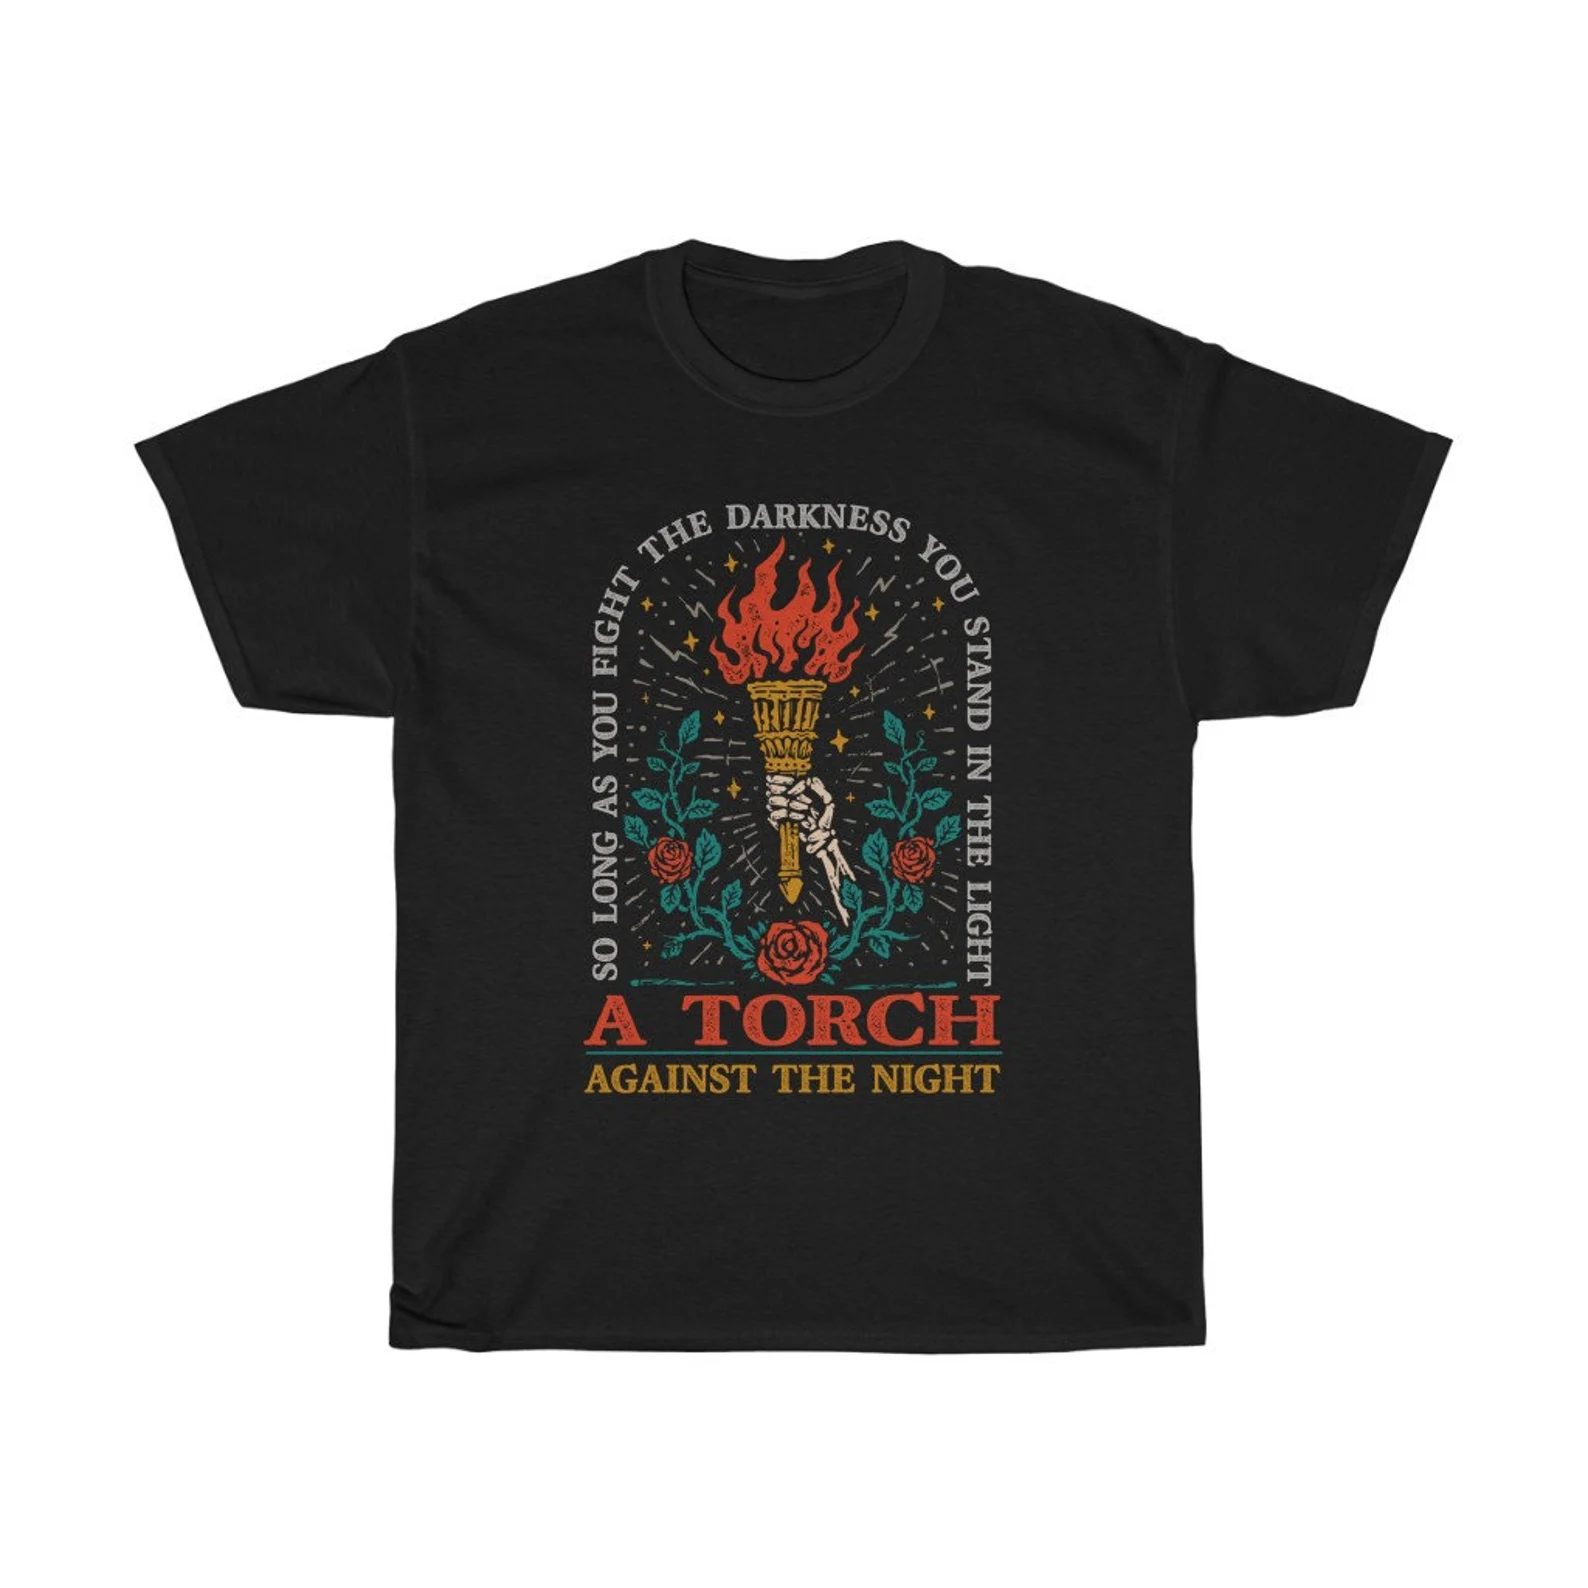 A black t-shirt with a torch and roses